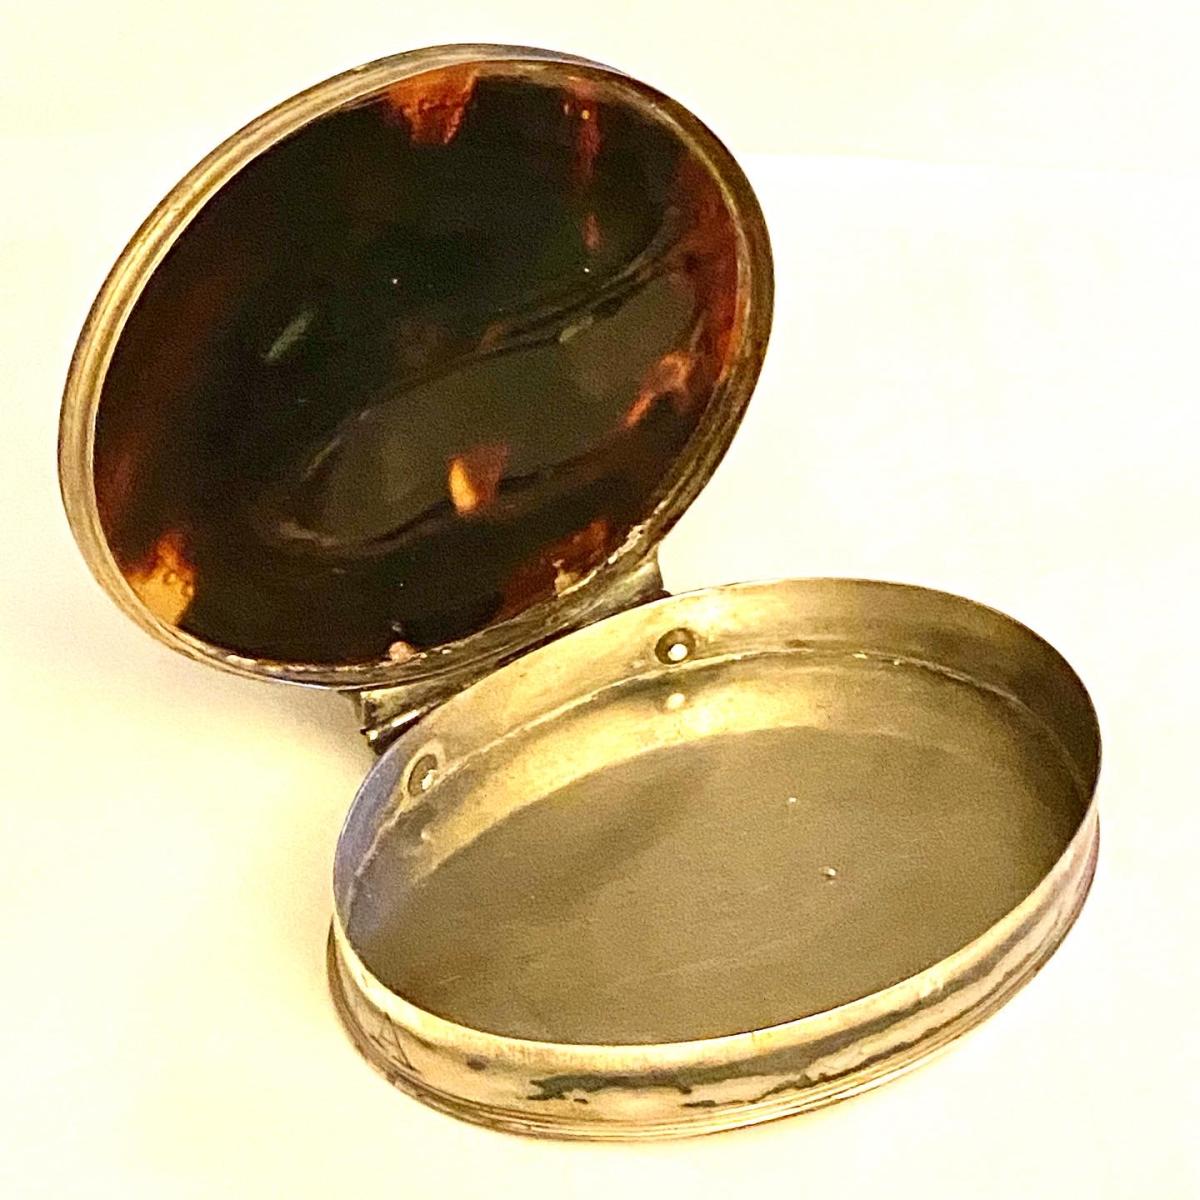 Stunning dated ‘Pique’ Turtleshell and unmarked Silver snuffbox